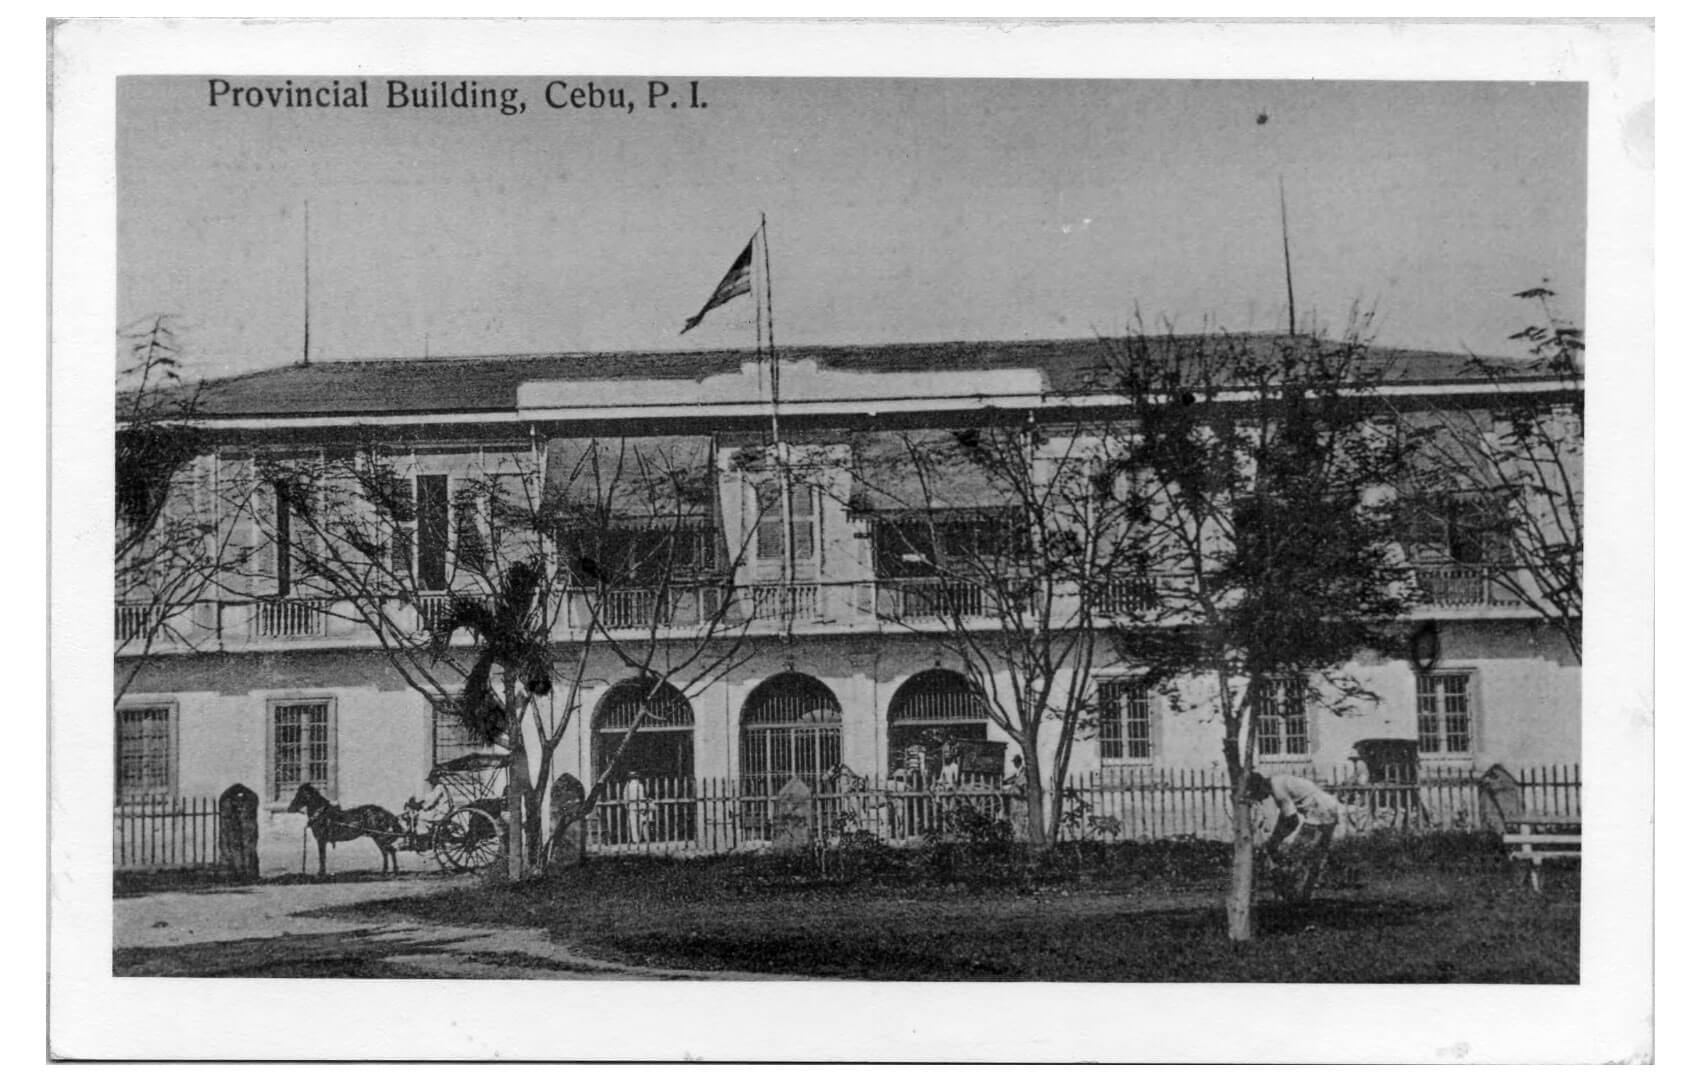 Another view of the Casa Provincial. (Photo from the Medalle Collection and used with permission of the Cebuano Studies Center of the University of San Carlos.)